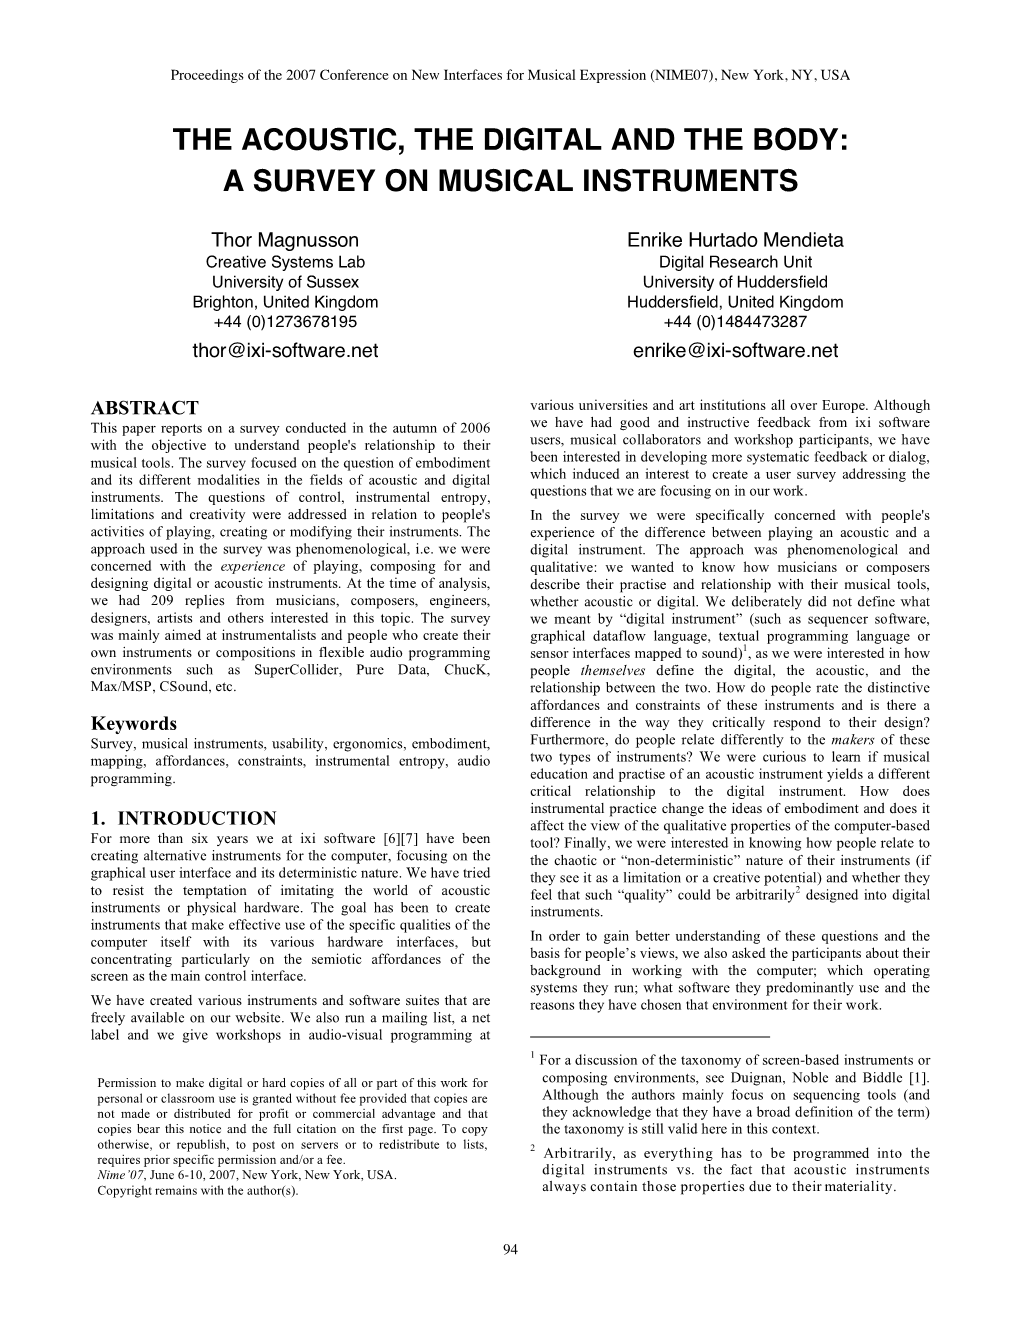 A Survey on Musical Instruments